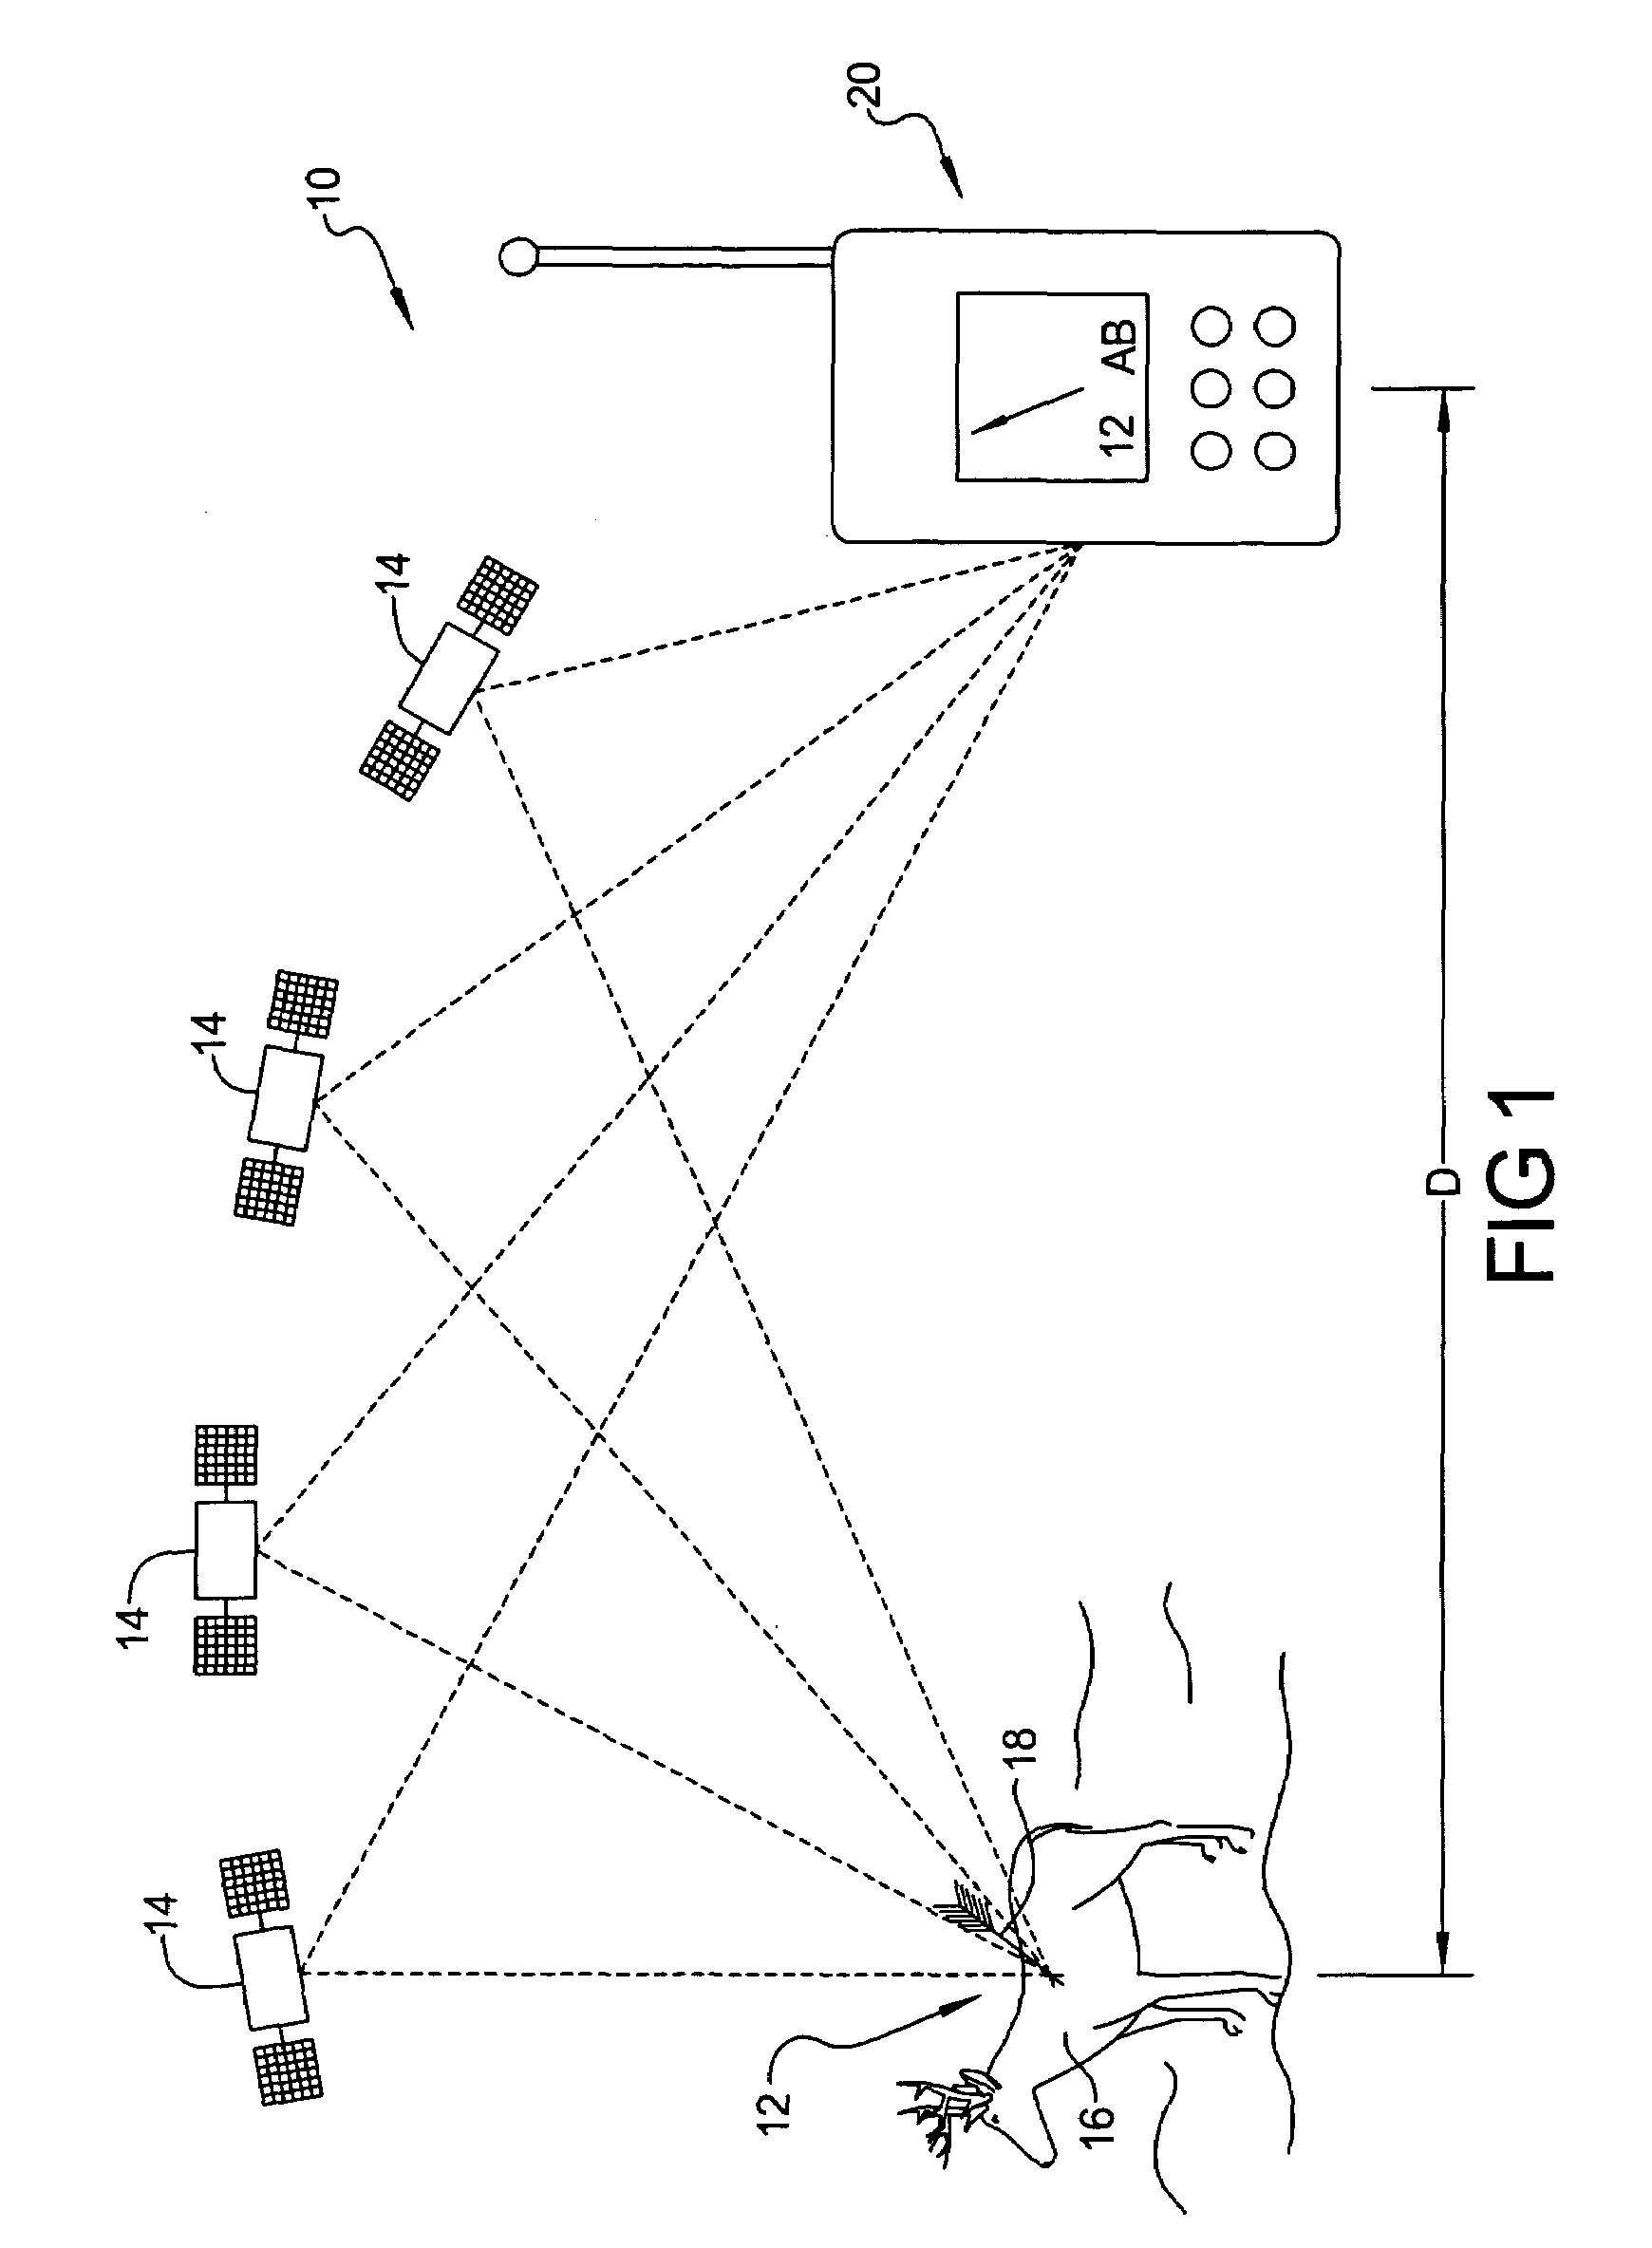 Hunting arrow tracking system